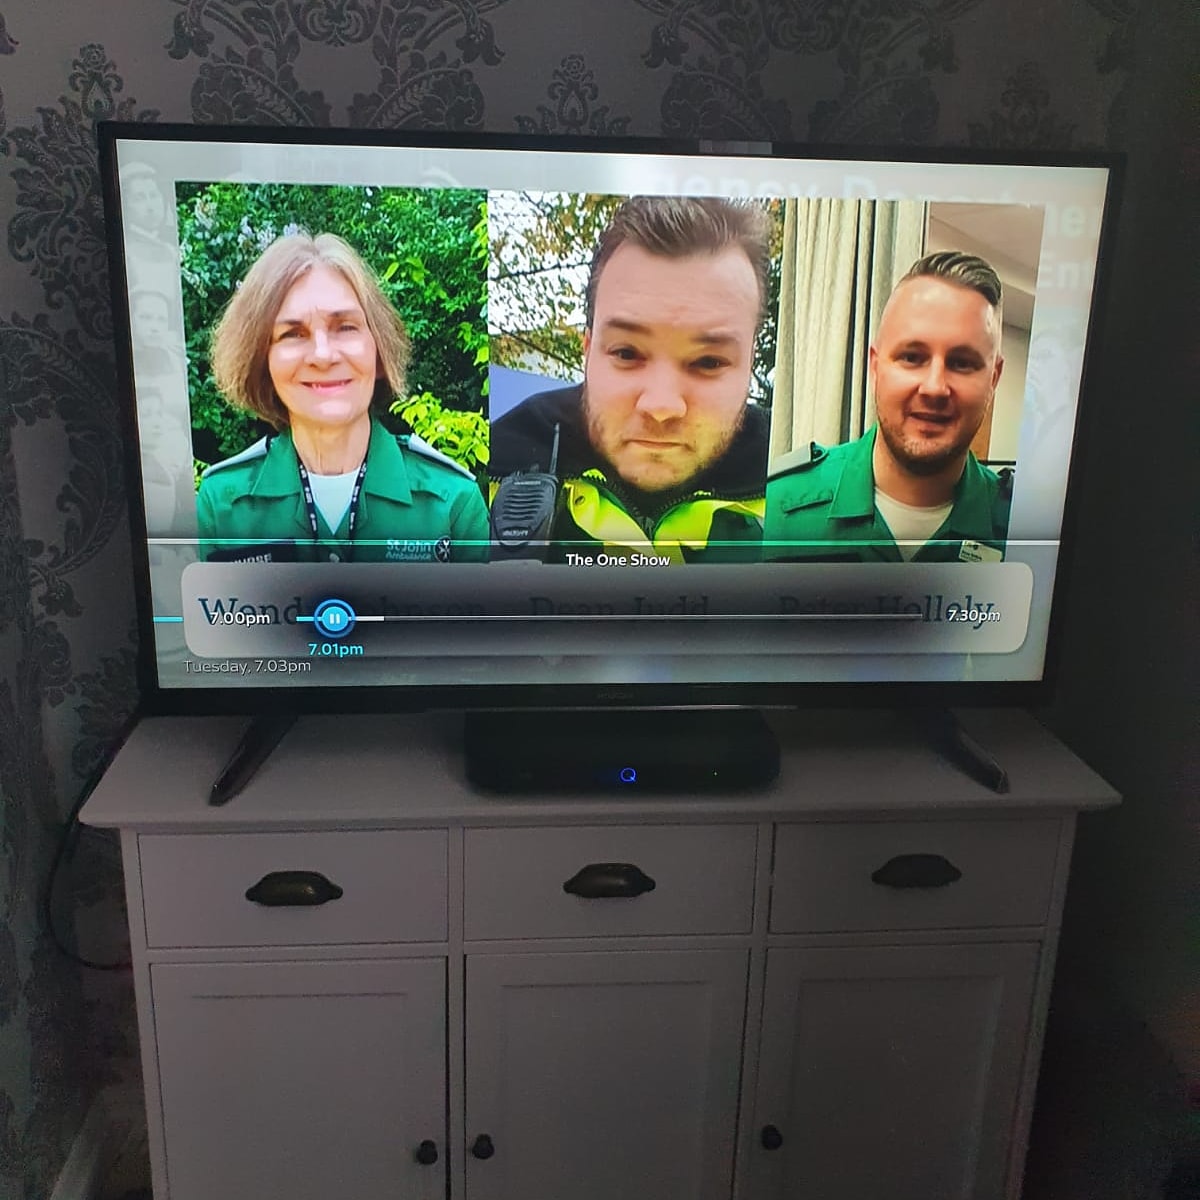 Look up and I'm on the BBC News! 
Honoured to be recognised alongside some of our St John Ambulance Nurses on #IND2020
So #proud of all our volunteers of every skill level but today i can be even more proud of my fellow voluntary nurses! Keep up the great work everyone x